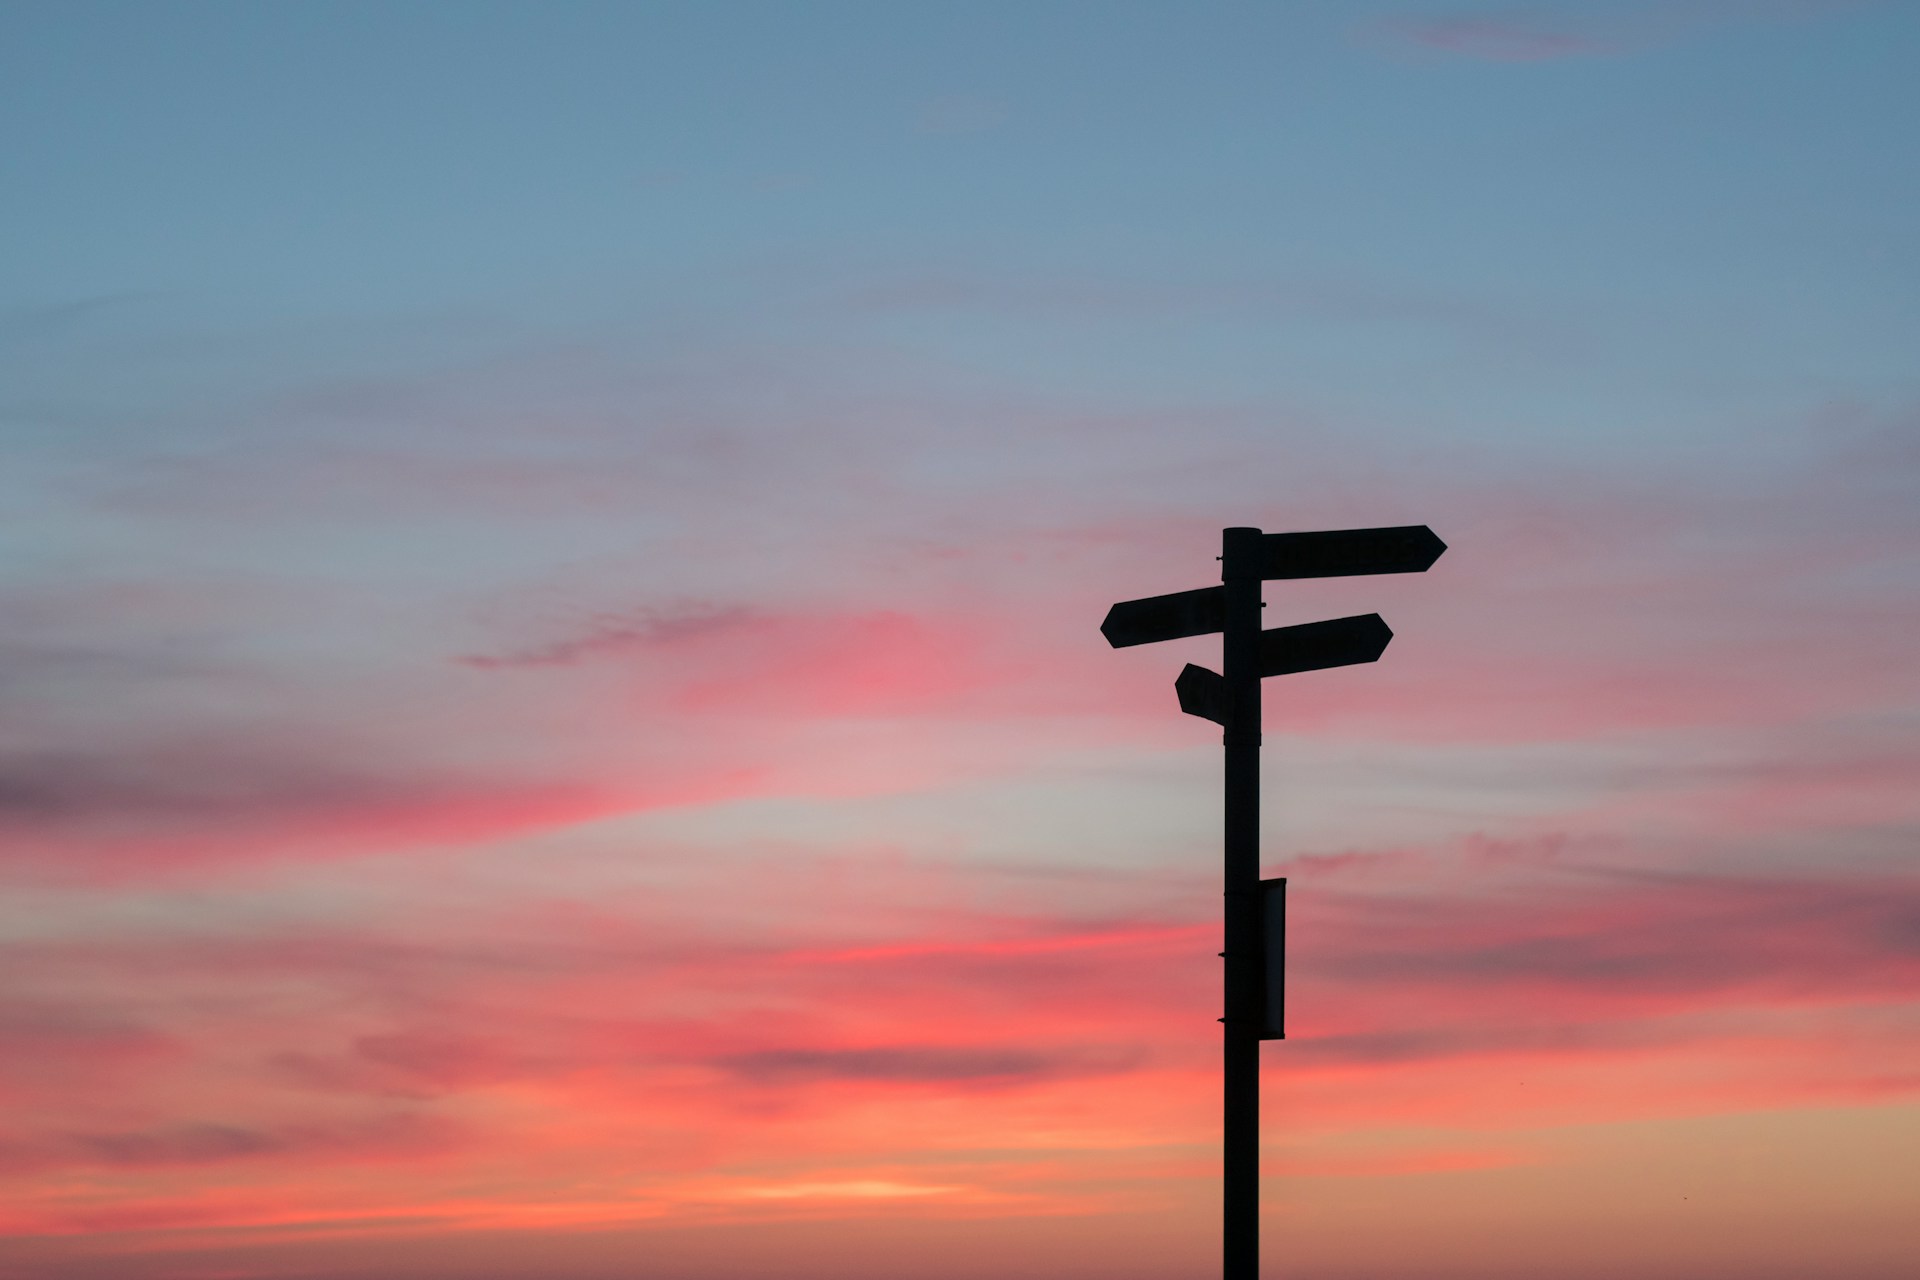 Sunset behind signpost pointing in different directions.